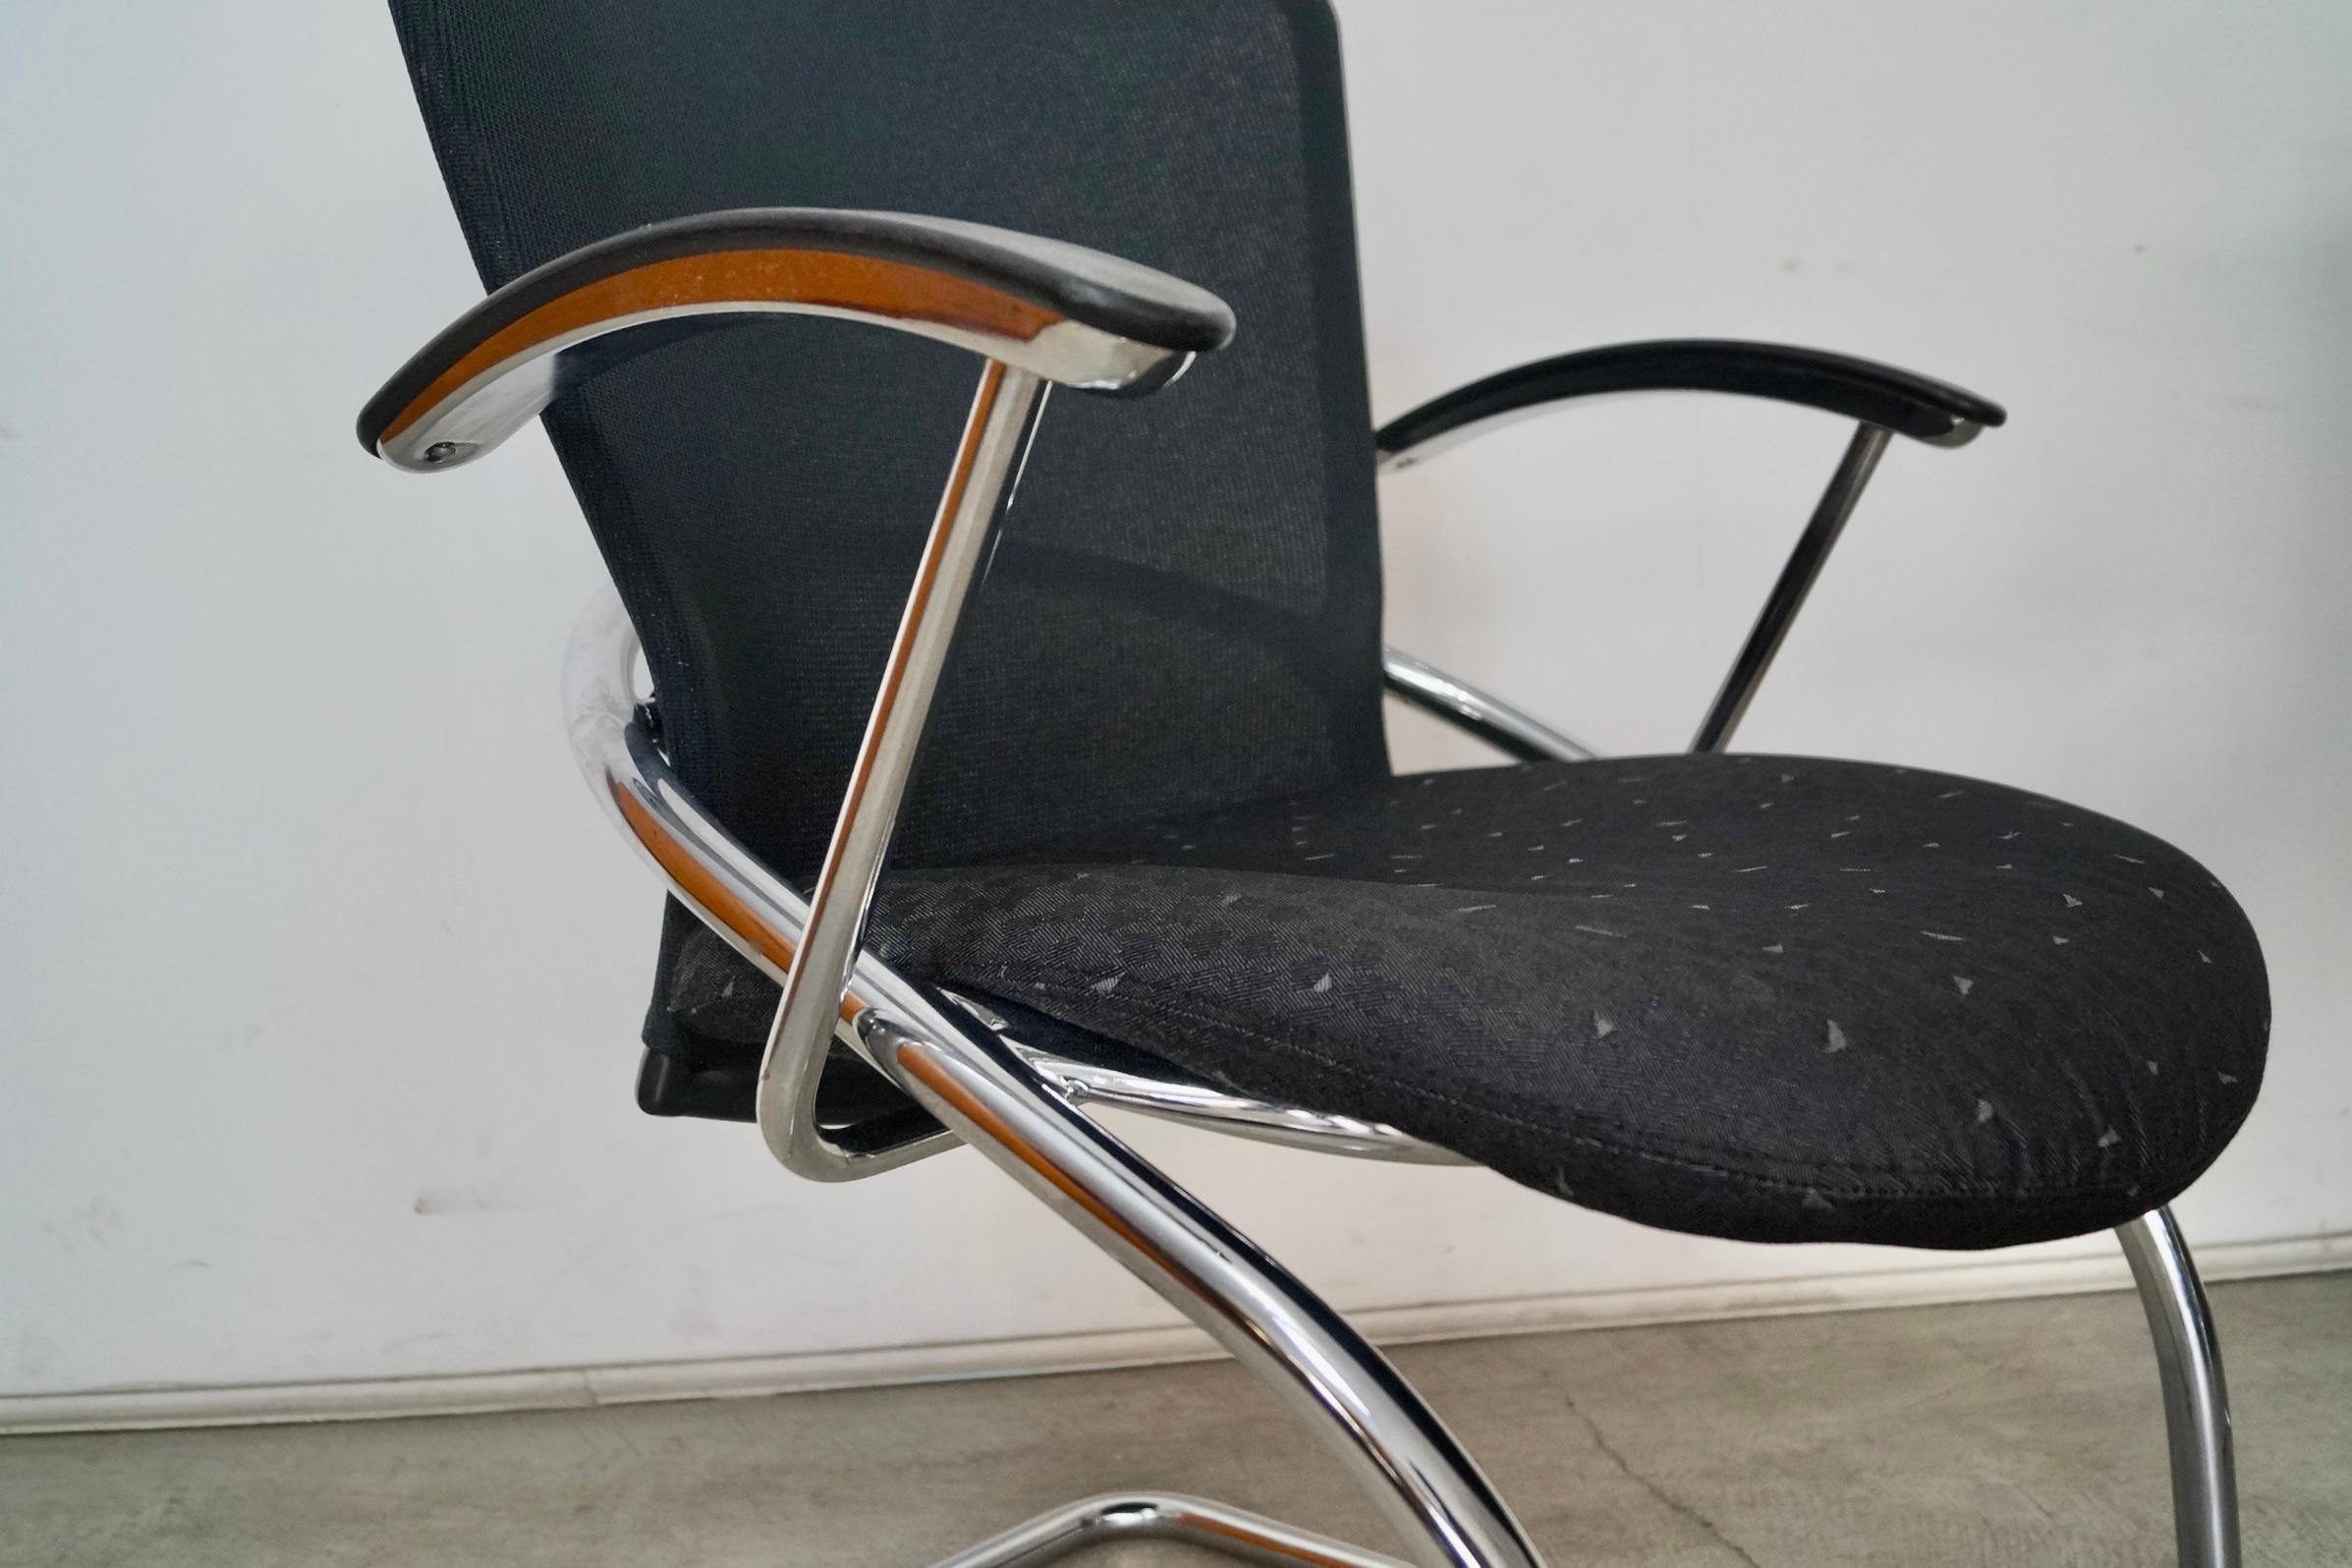 1990's Postmodern German Chrome Cantilever Arm Chairs - A Pair For Sale 11